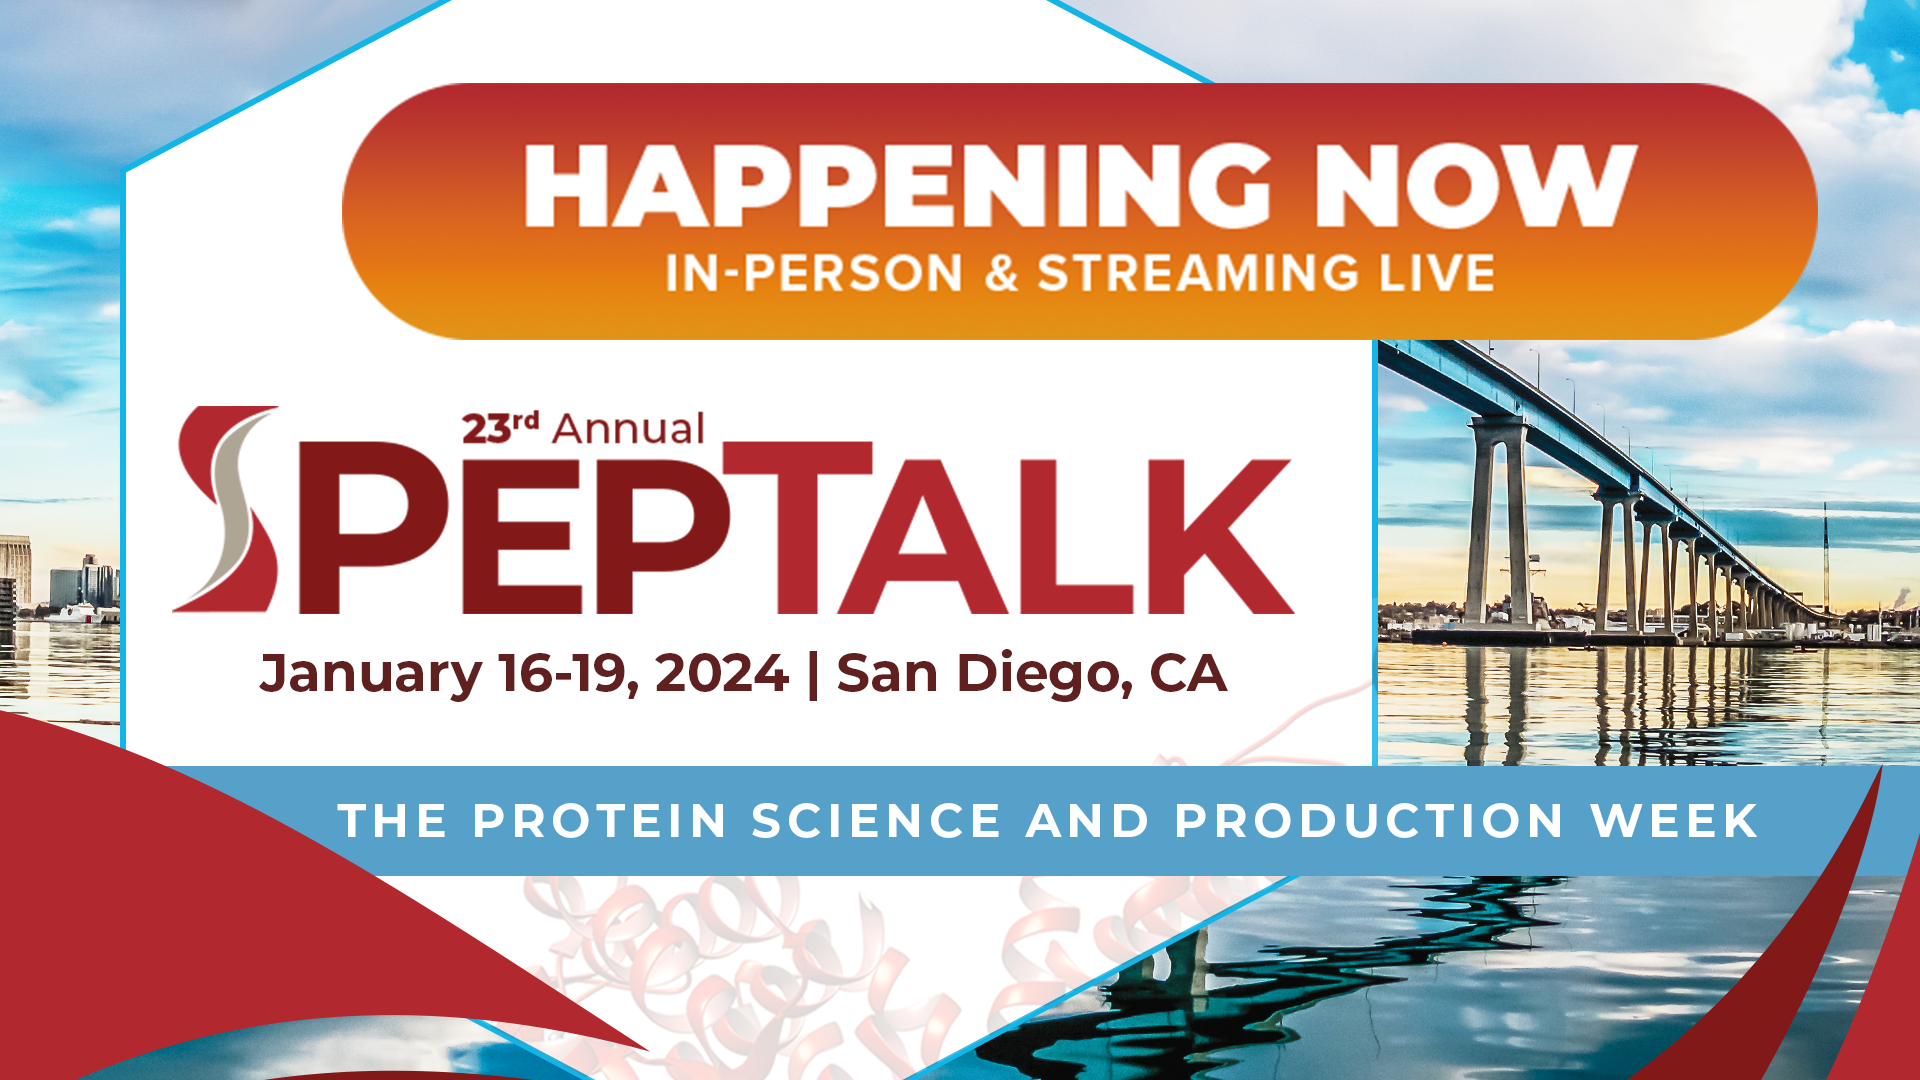 PepTalk - The Protein Science and Production Week | January 16-19, 2024